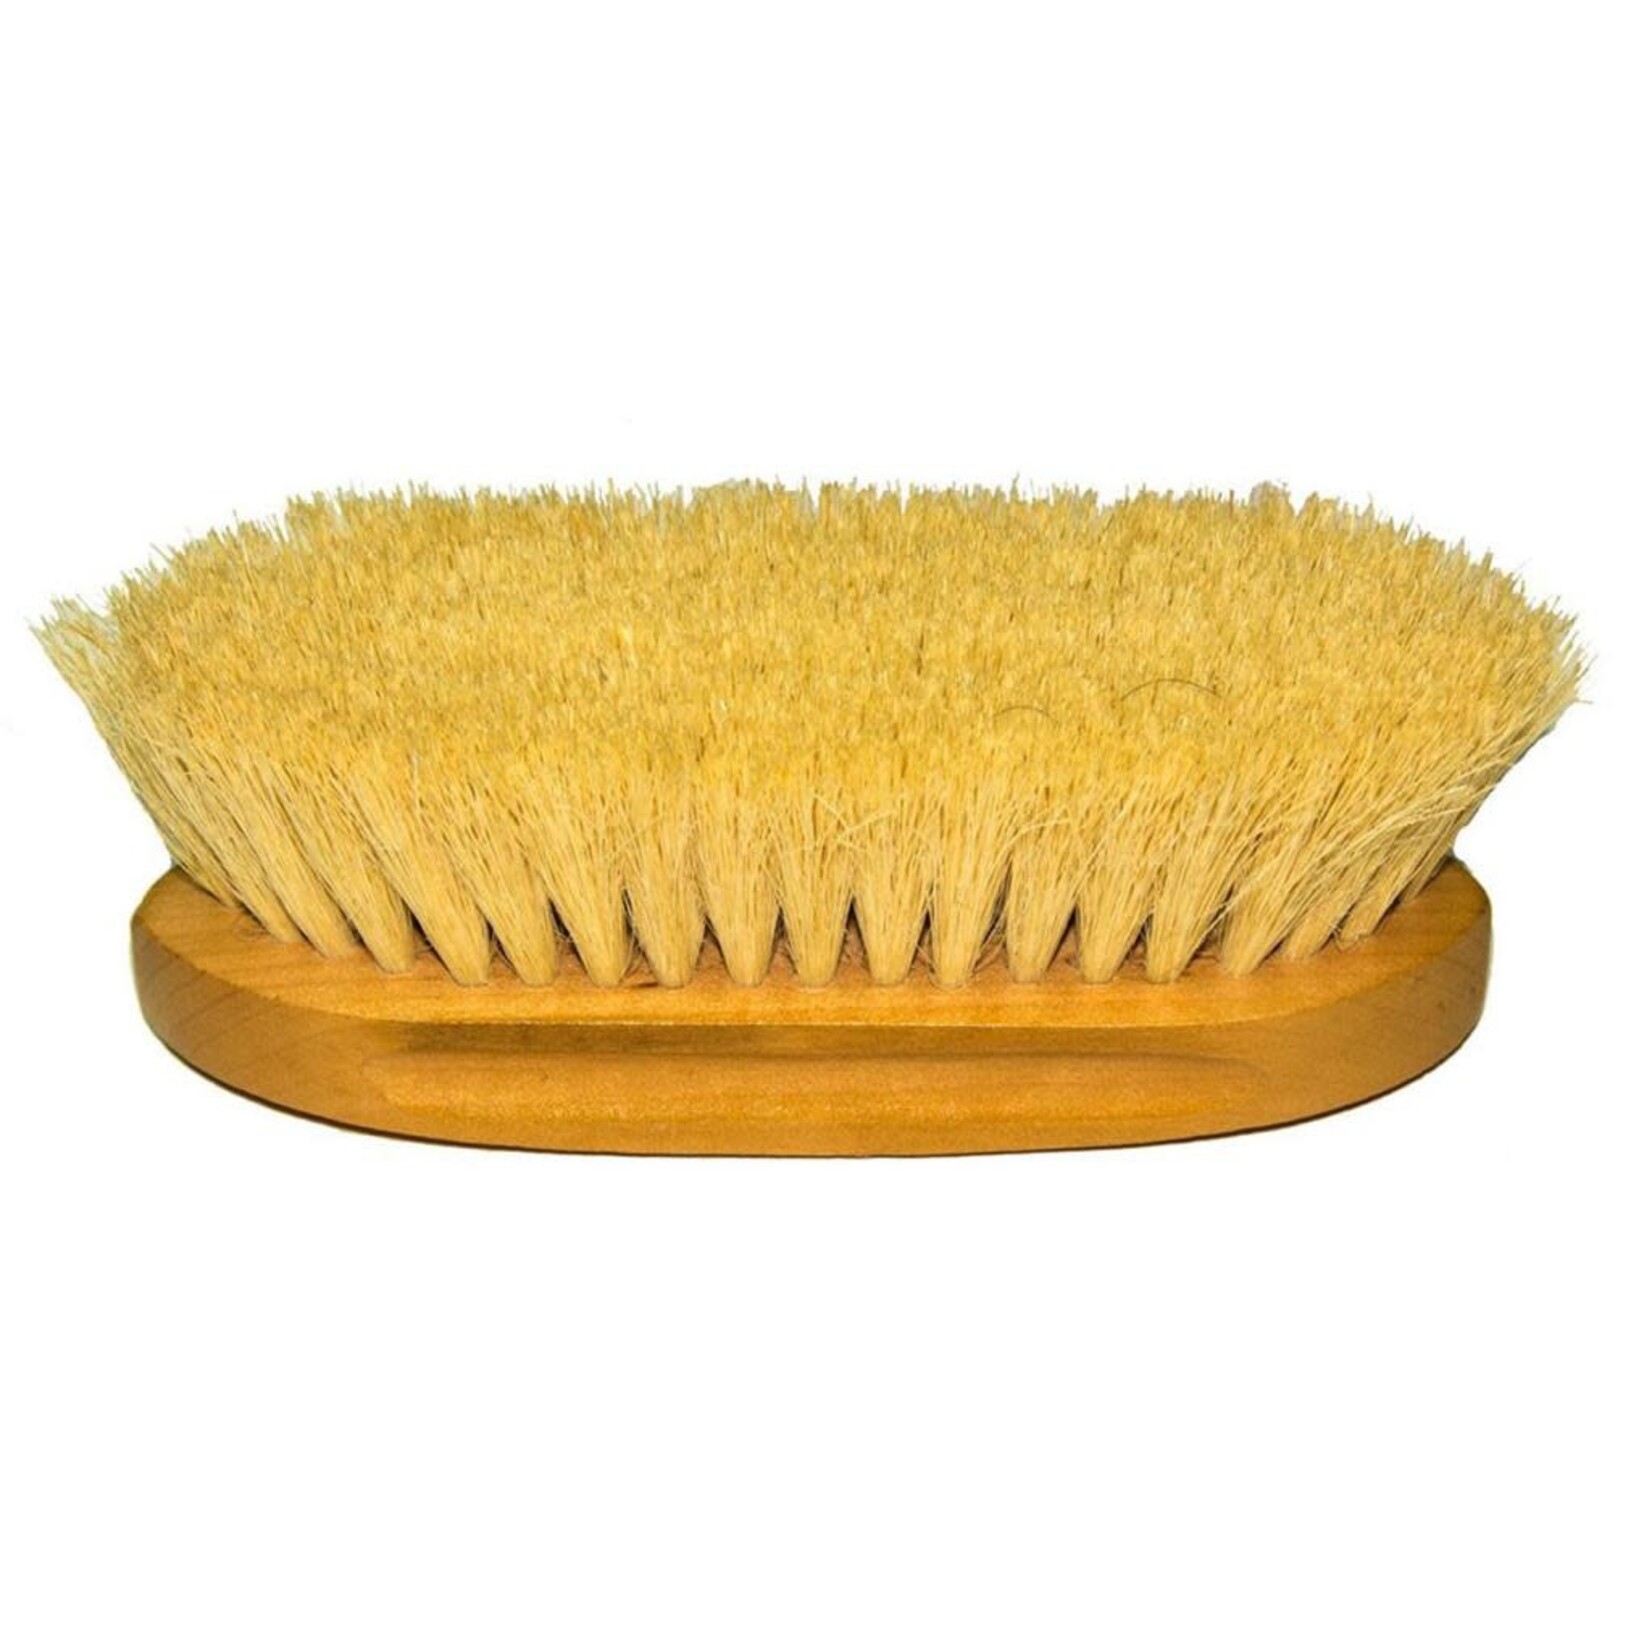 Natural Tampico “Buttermilk” Easy Clean Body Brush - Large